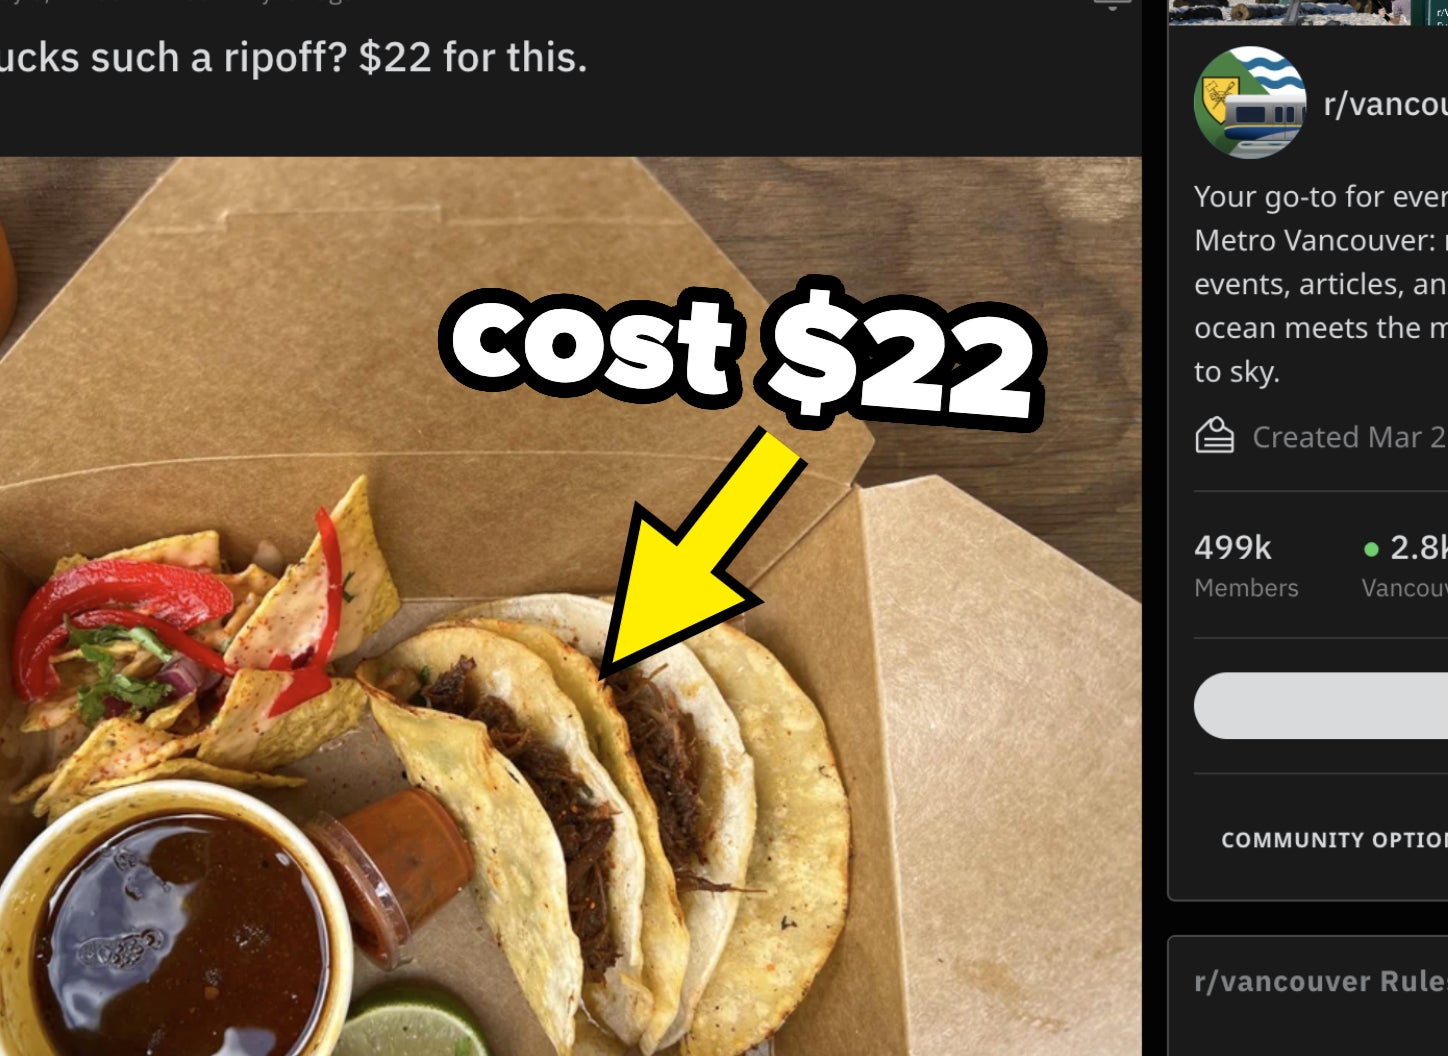 A $22 taco meal from a food truck is being shown